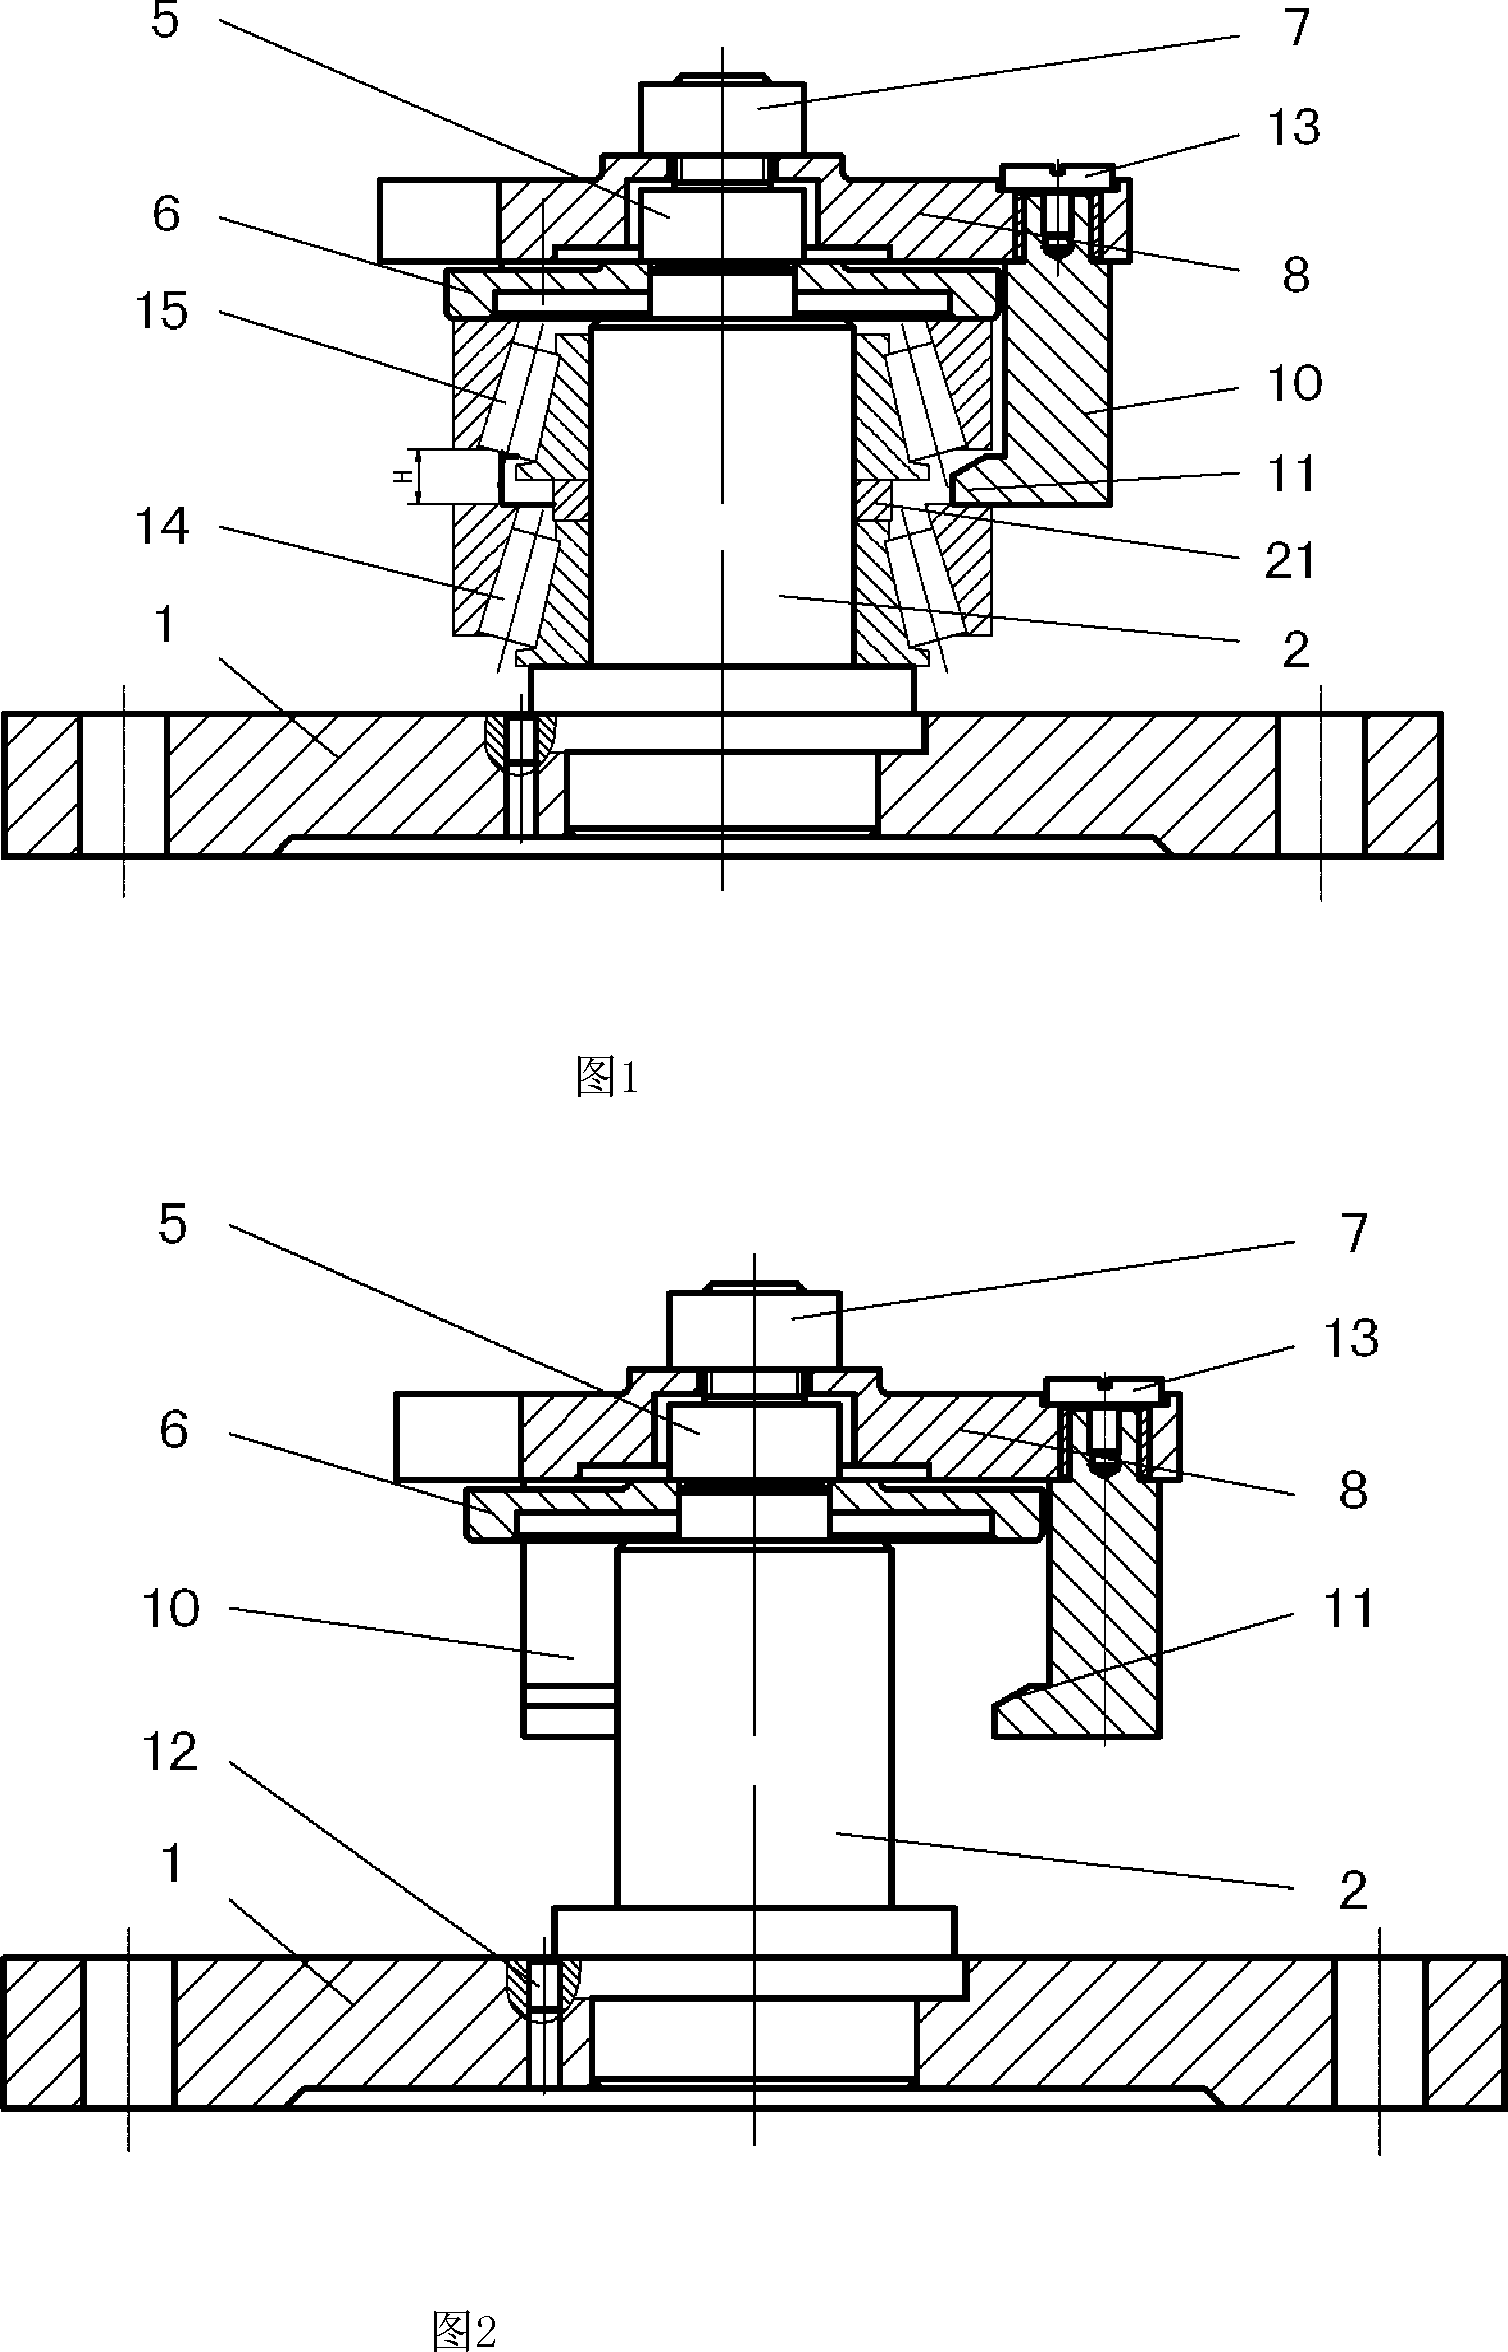 Method for measuring single row conical bearing connection in series matched pair inter space